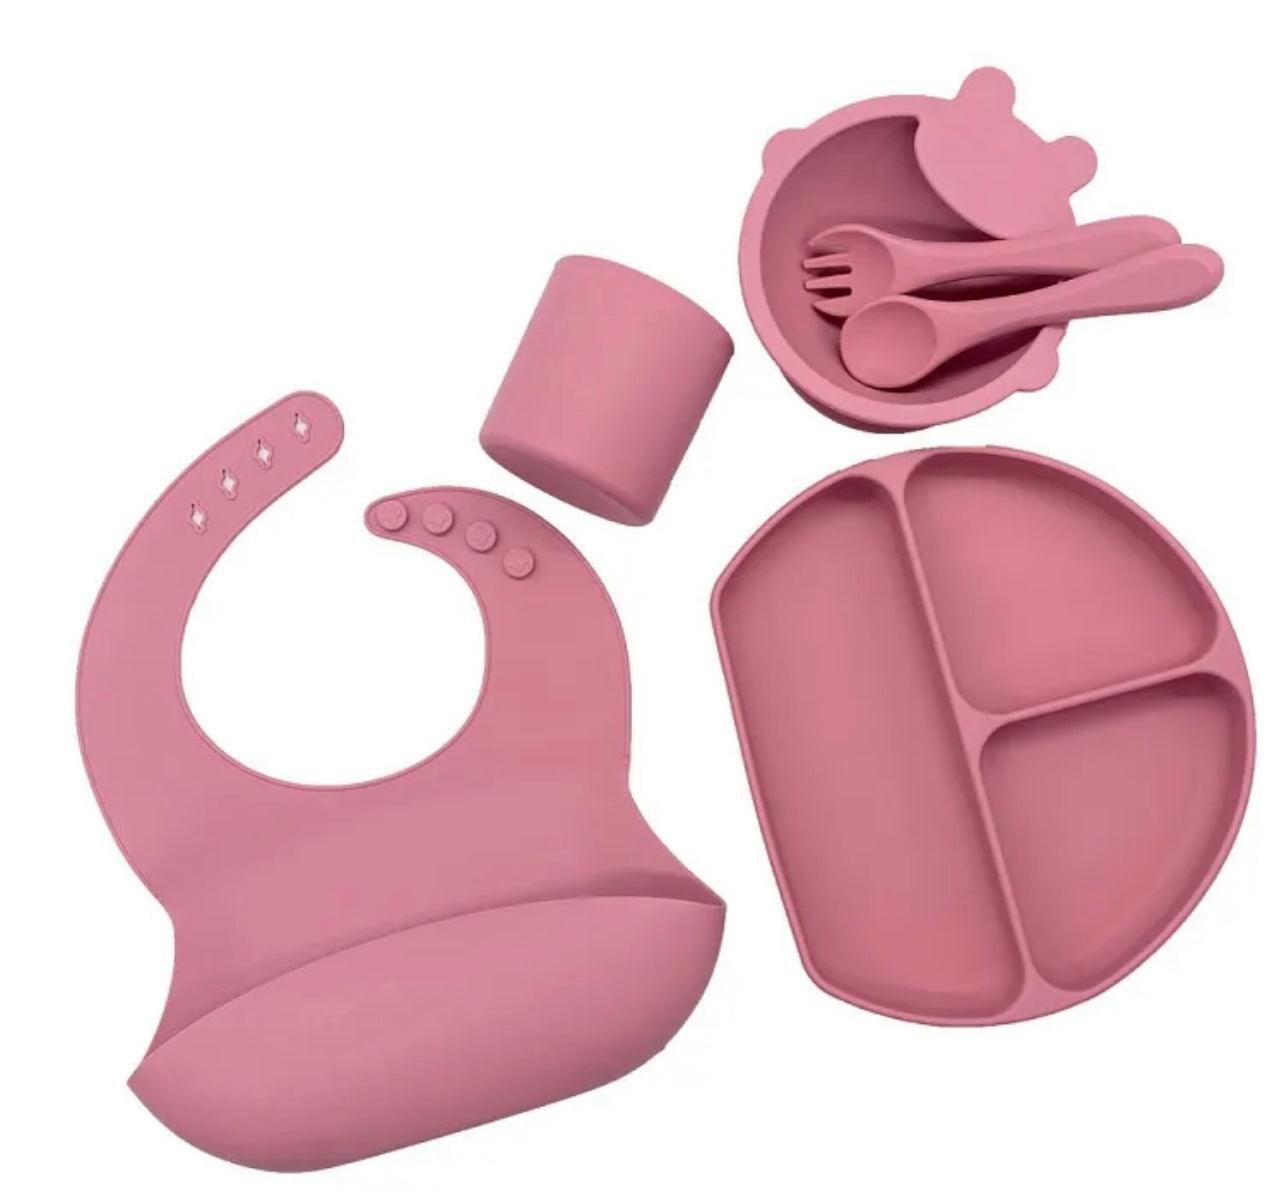 Silicone Baby Dinnerware Set - Expat Life Style